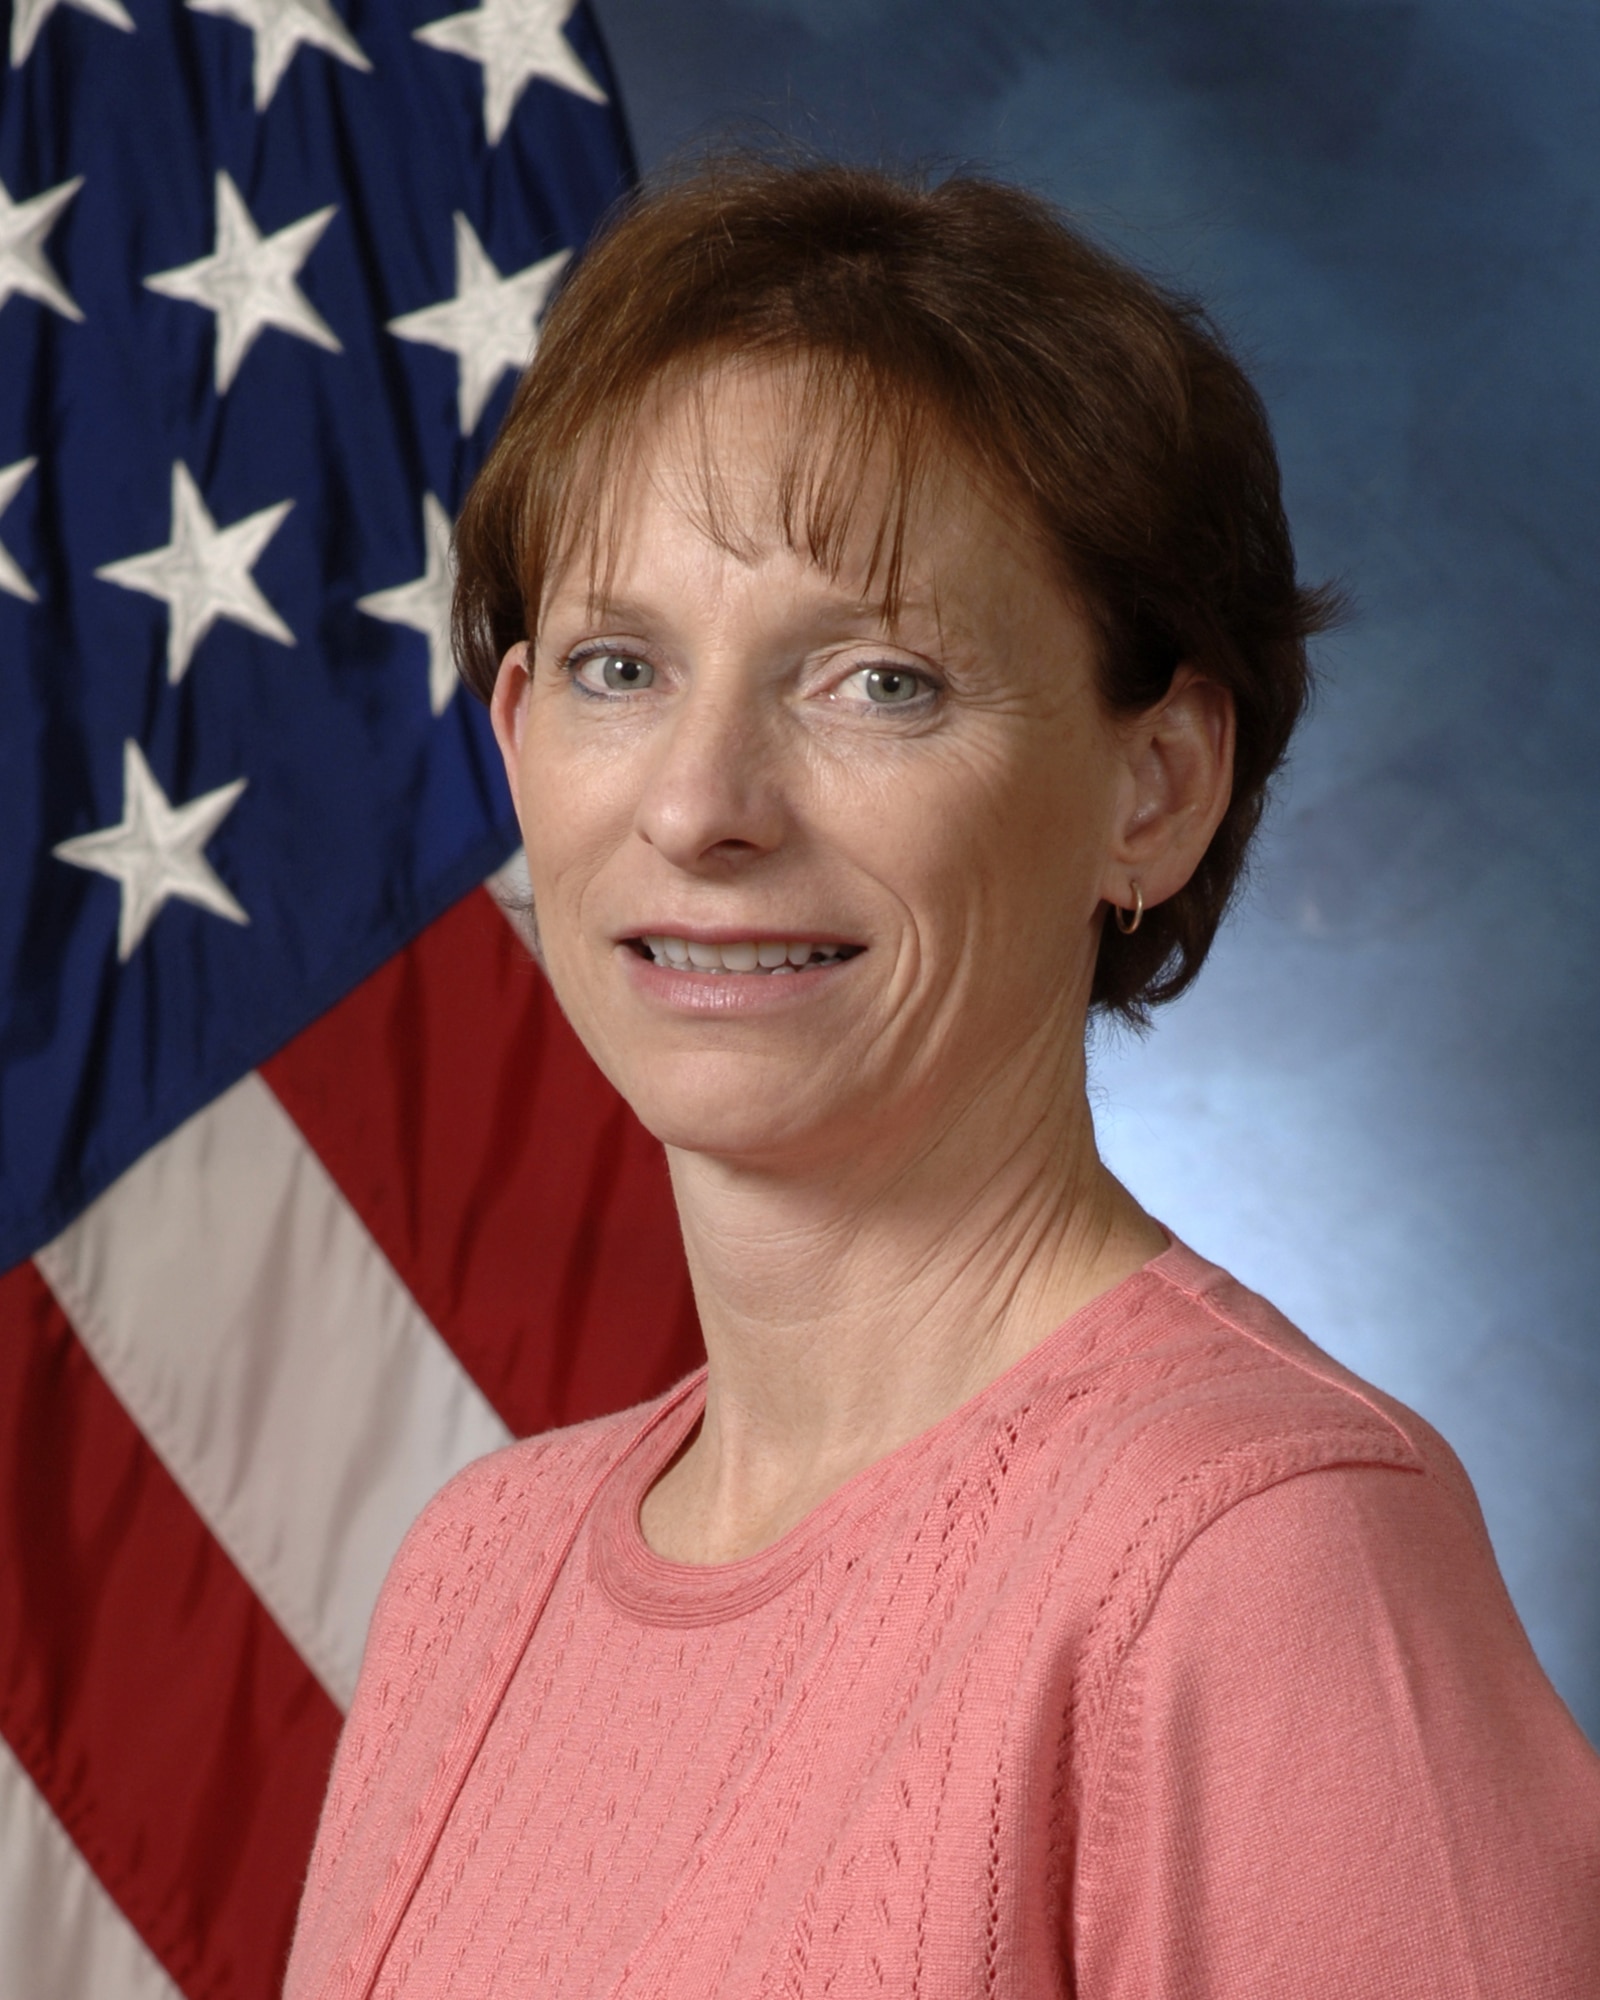 Kathleen Denny, the unit training manager for the 1st Special Operations Logistics Readiness Squadron at Hurlburt Field, is the 2007 Air Force Special Operations Command Category 2 Civilian of the year. (U.S. Air Force photo)